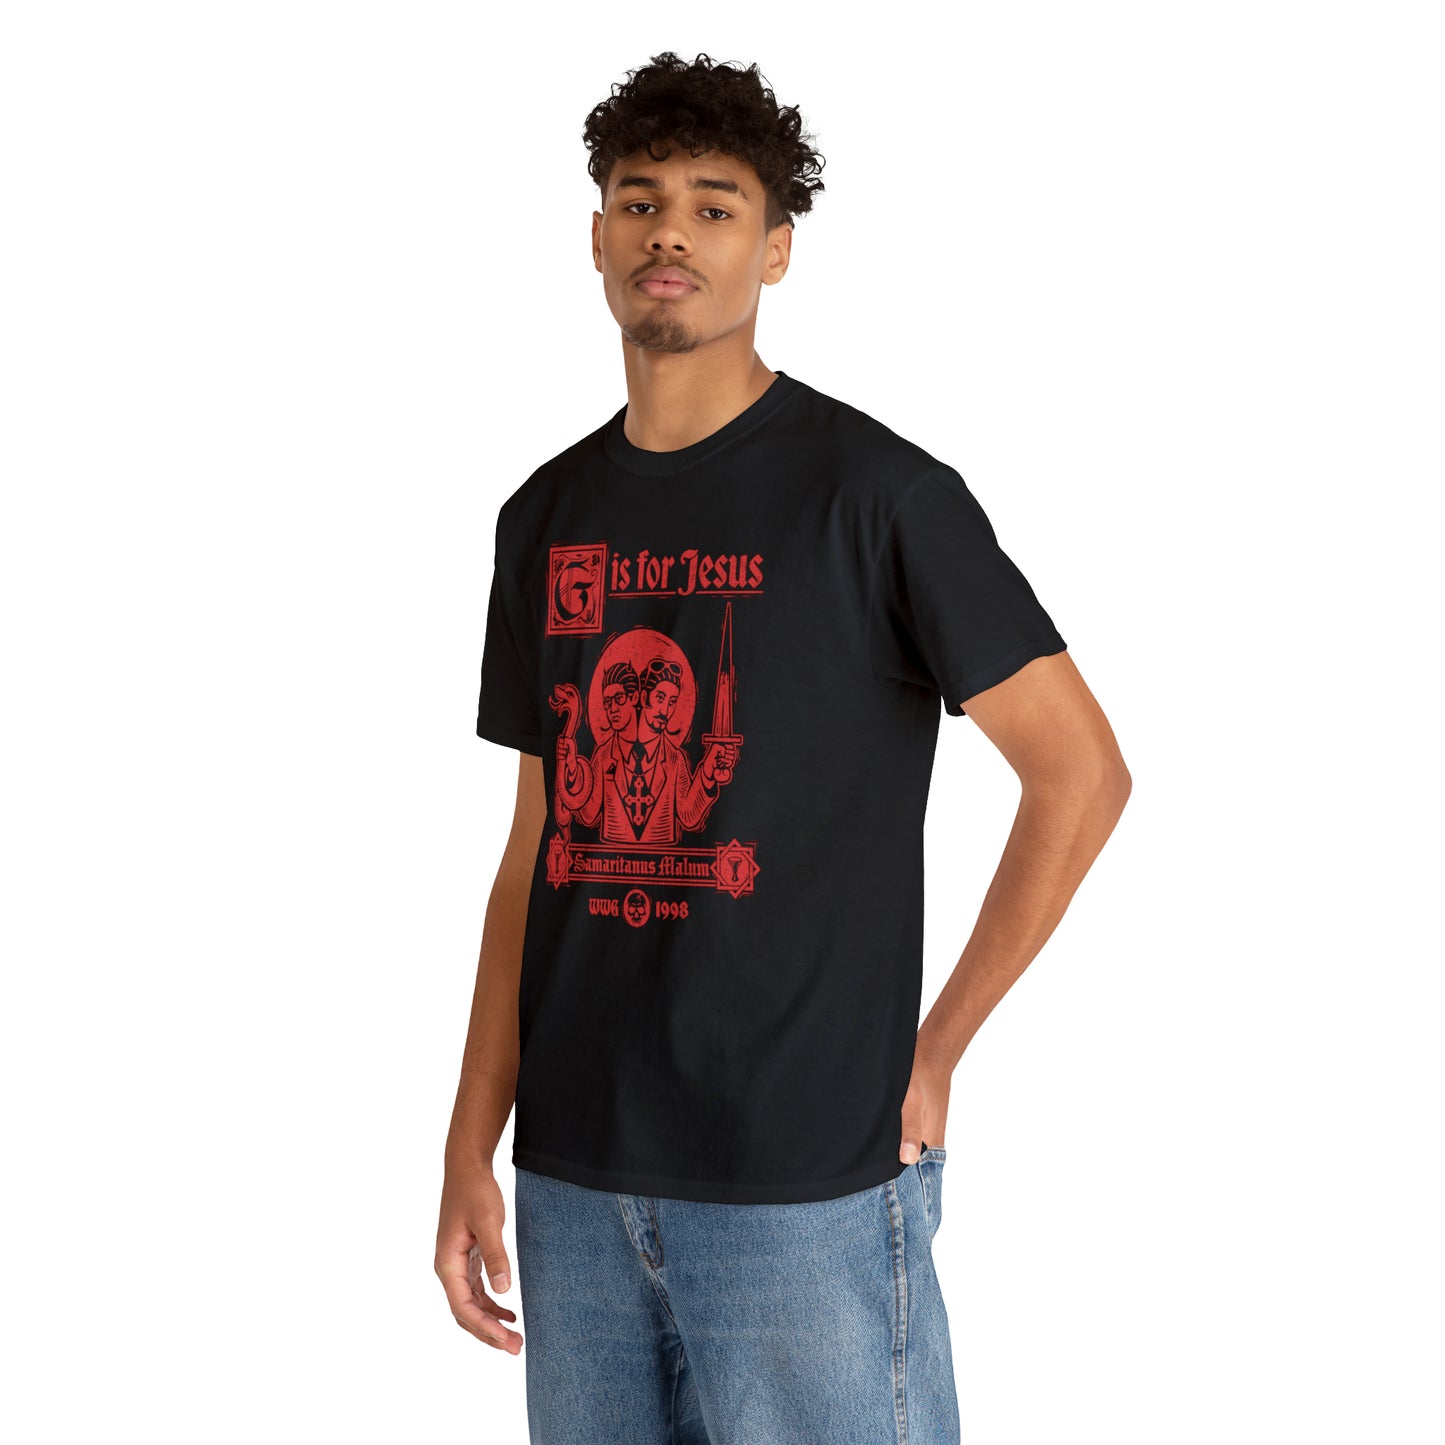 G is for Jesus T-shirt (Red Print)